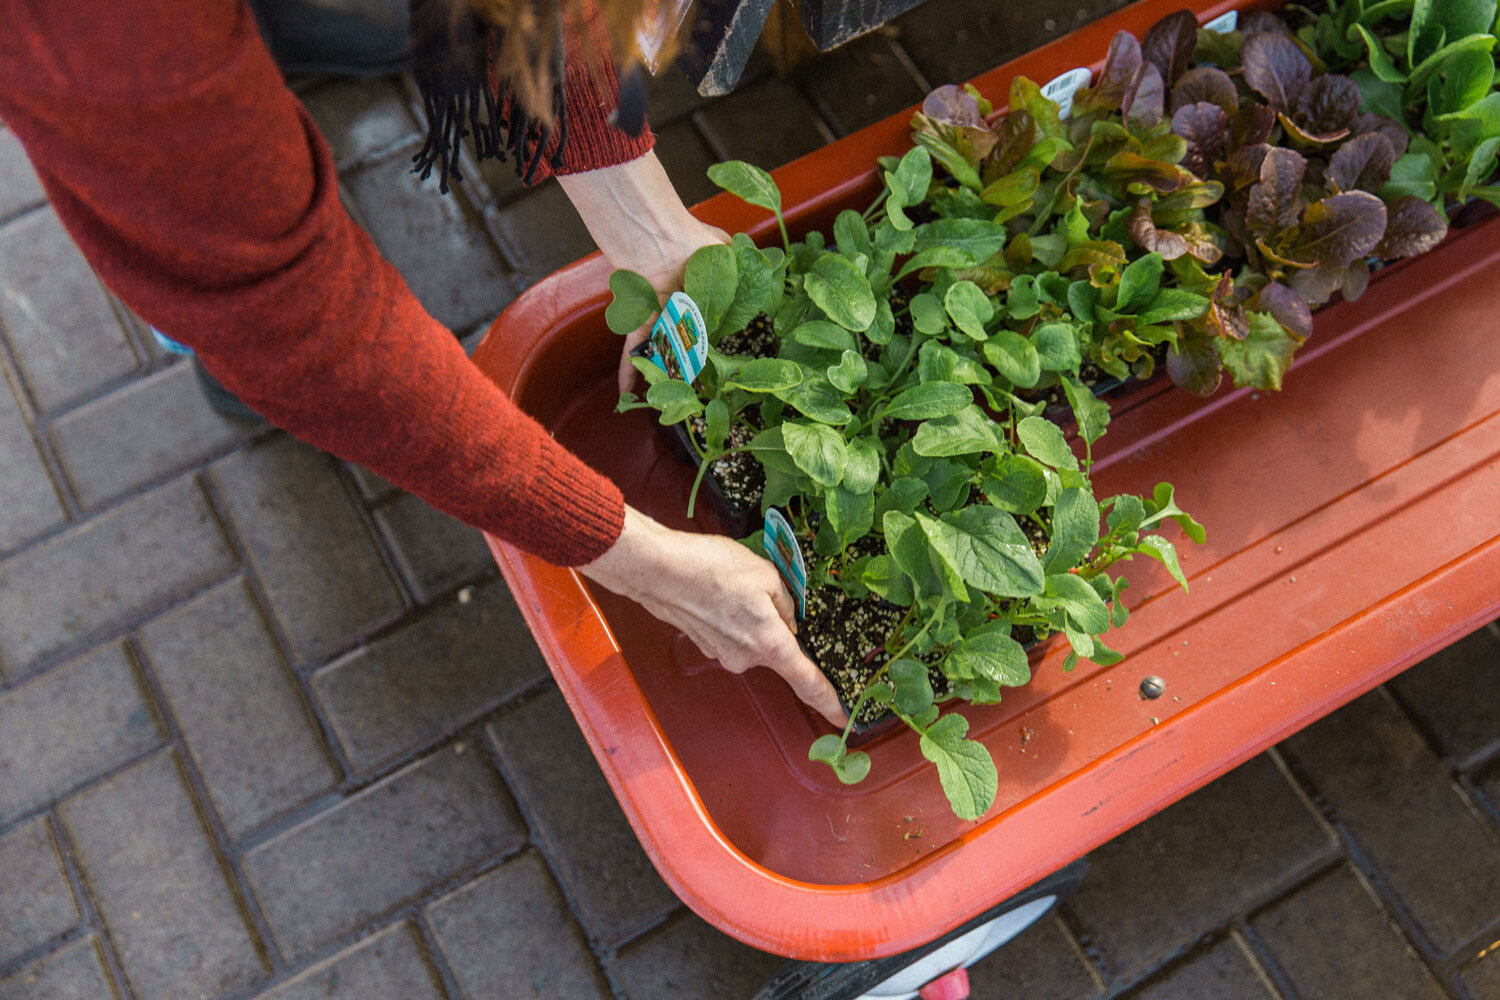 How to Start Organic Container Gardening: A Step-By-Step Growing